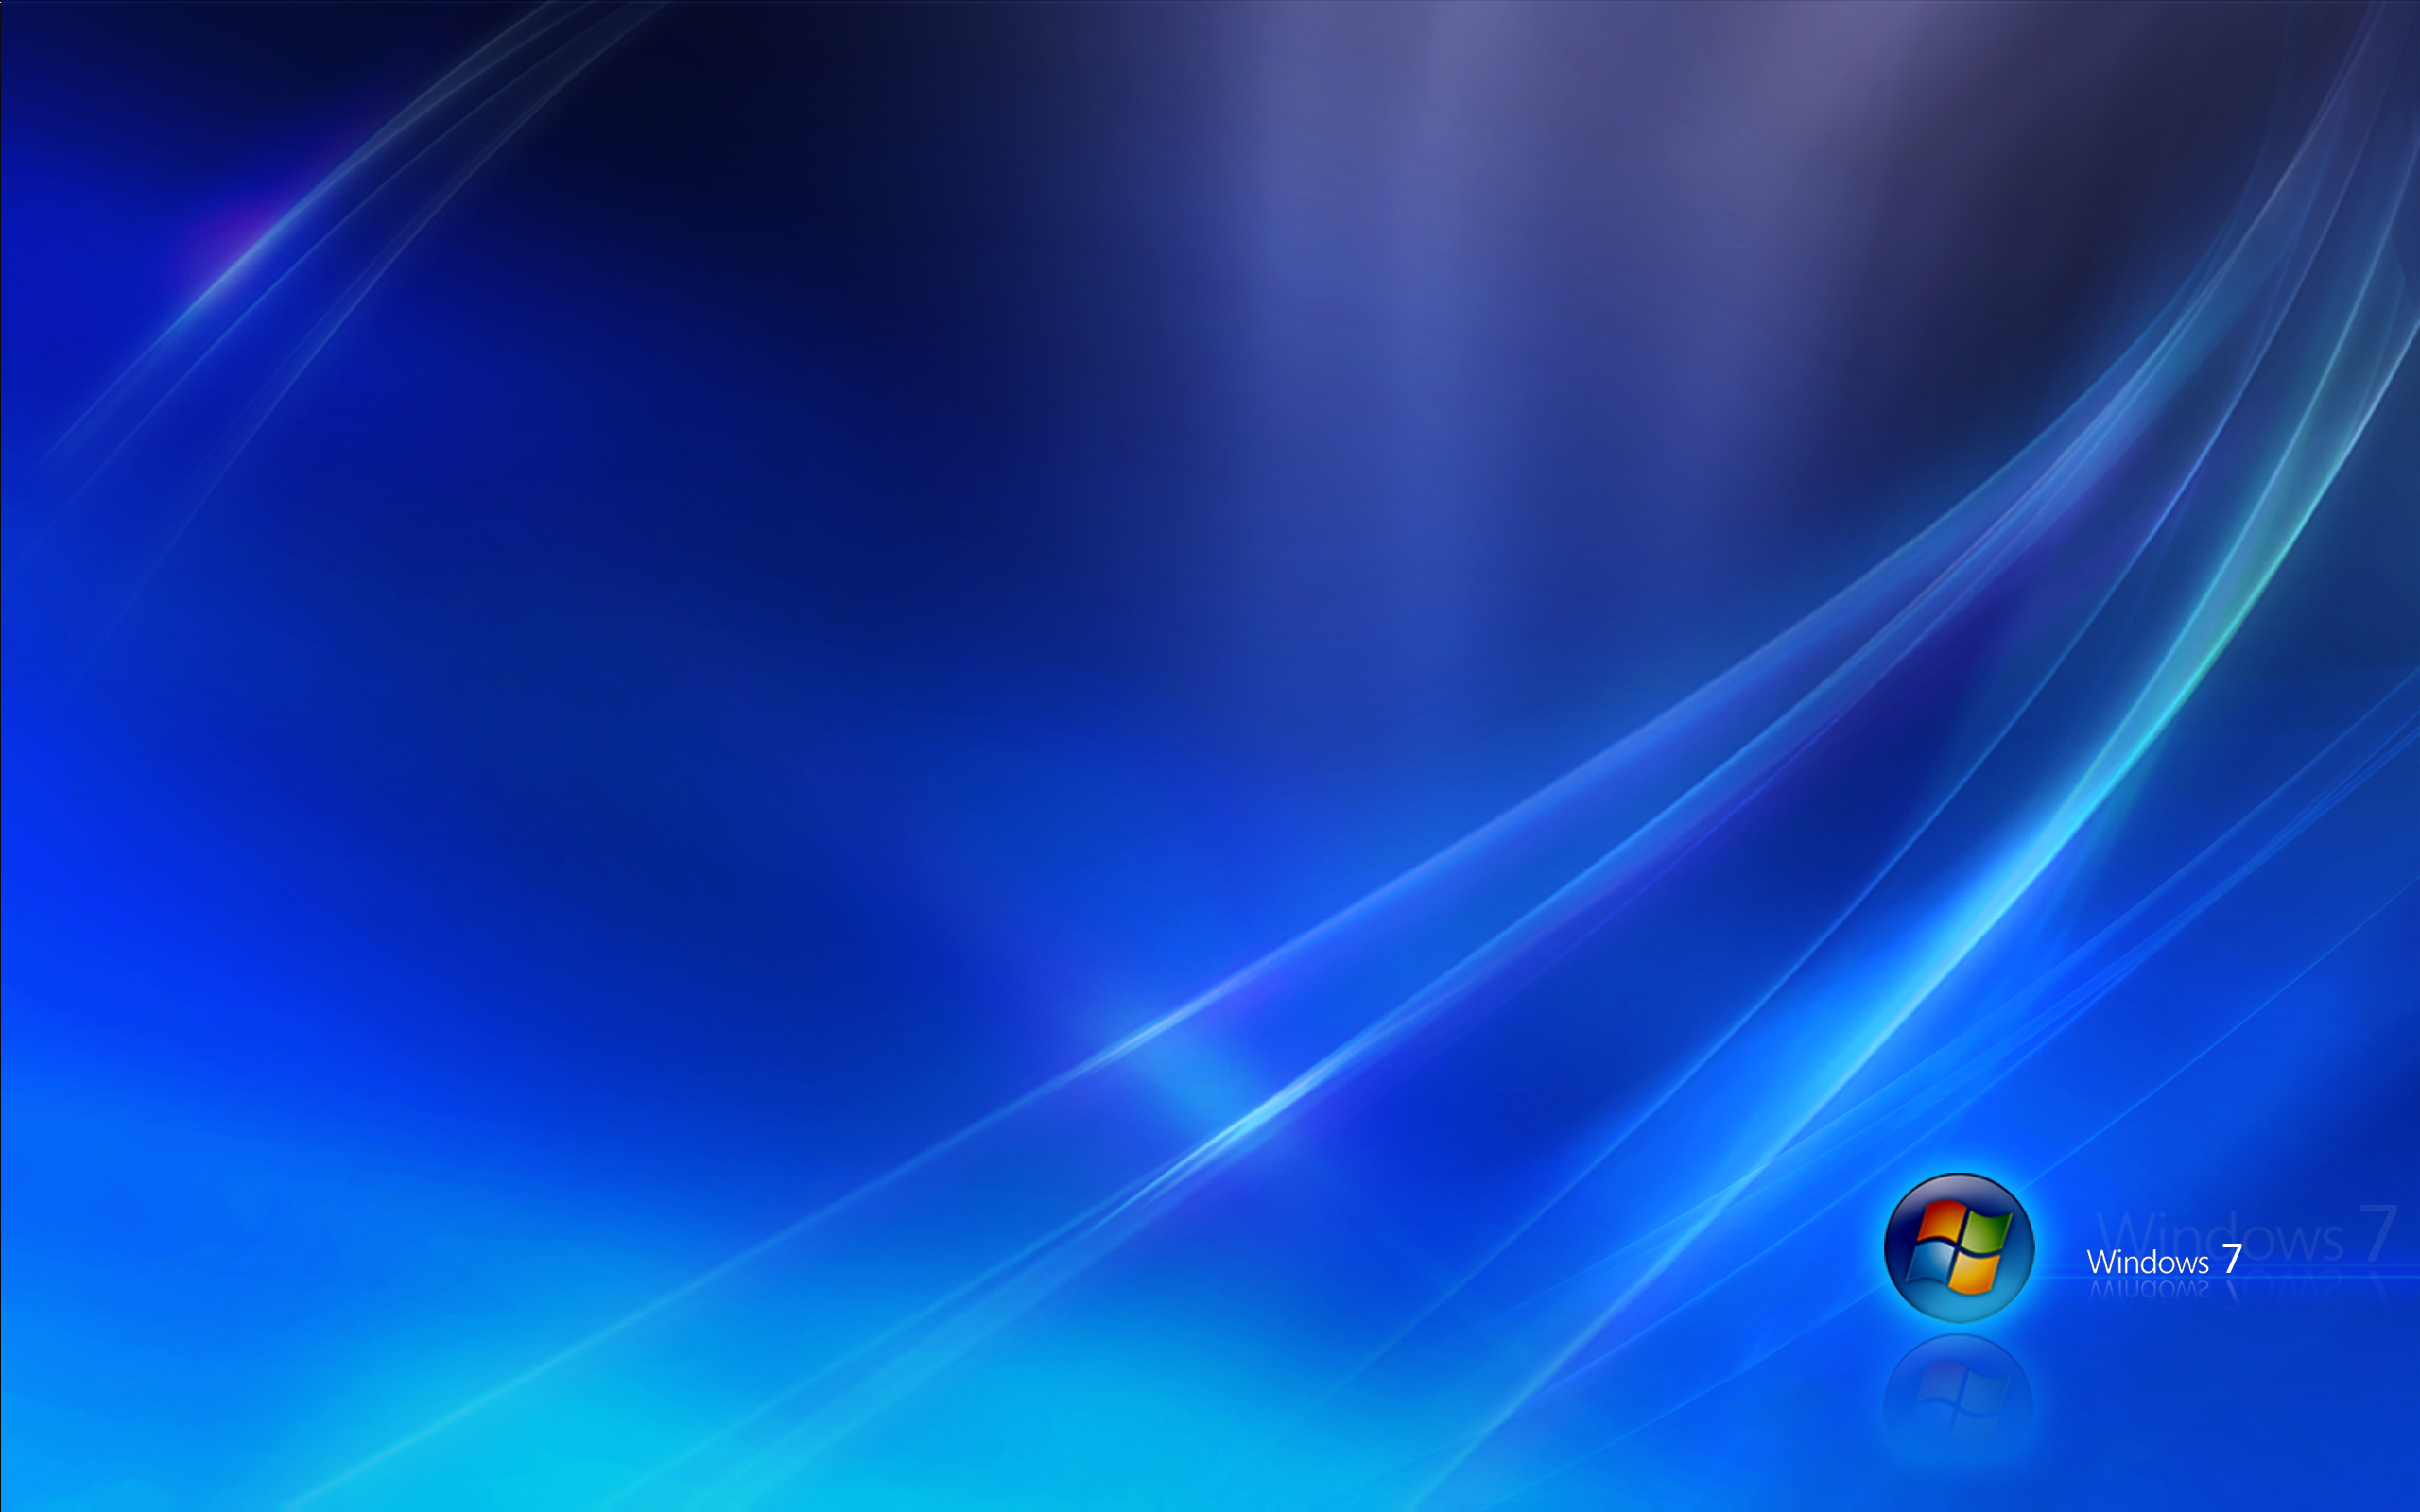 Image Search Windows8 Ultimate Wallpaper With Light Effect